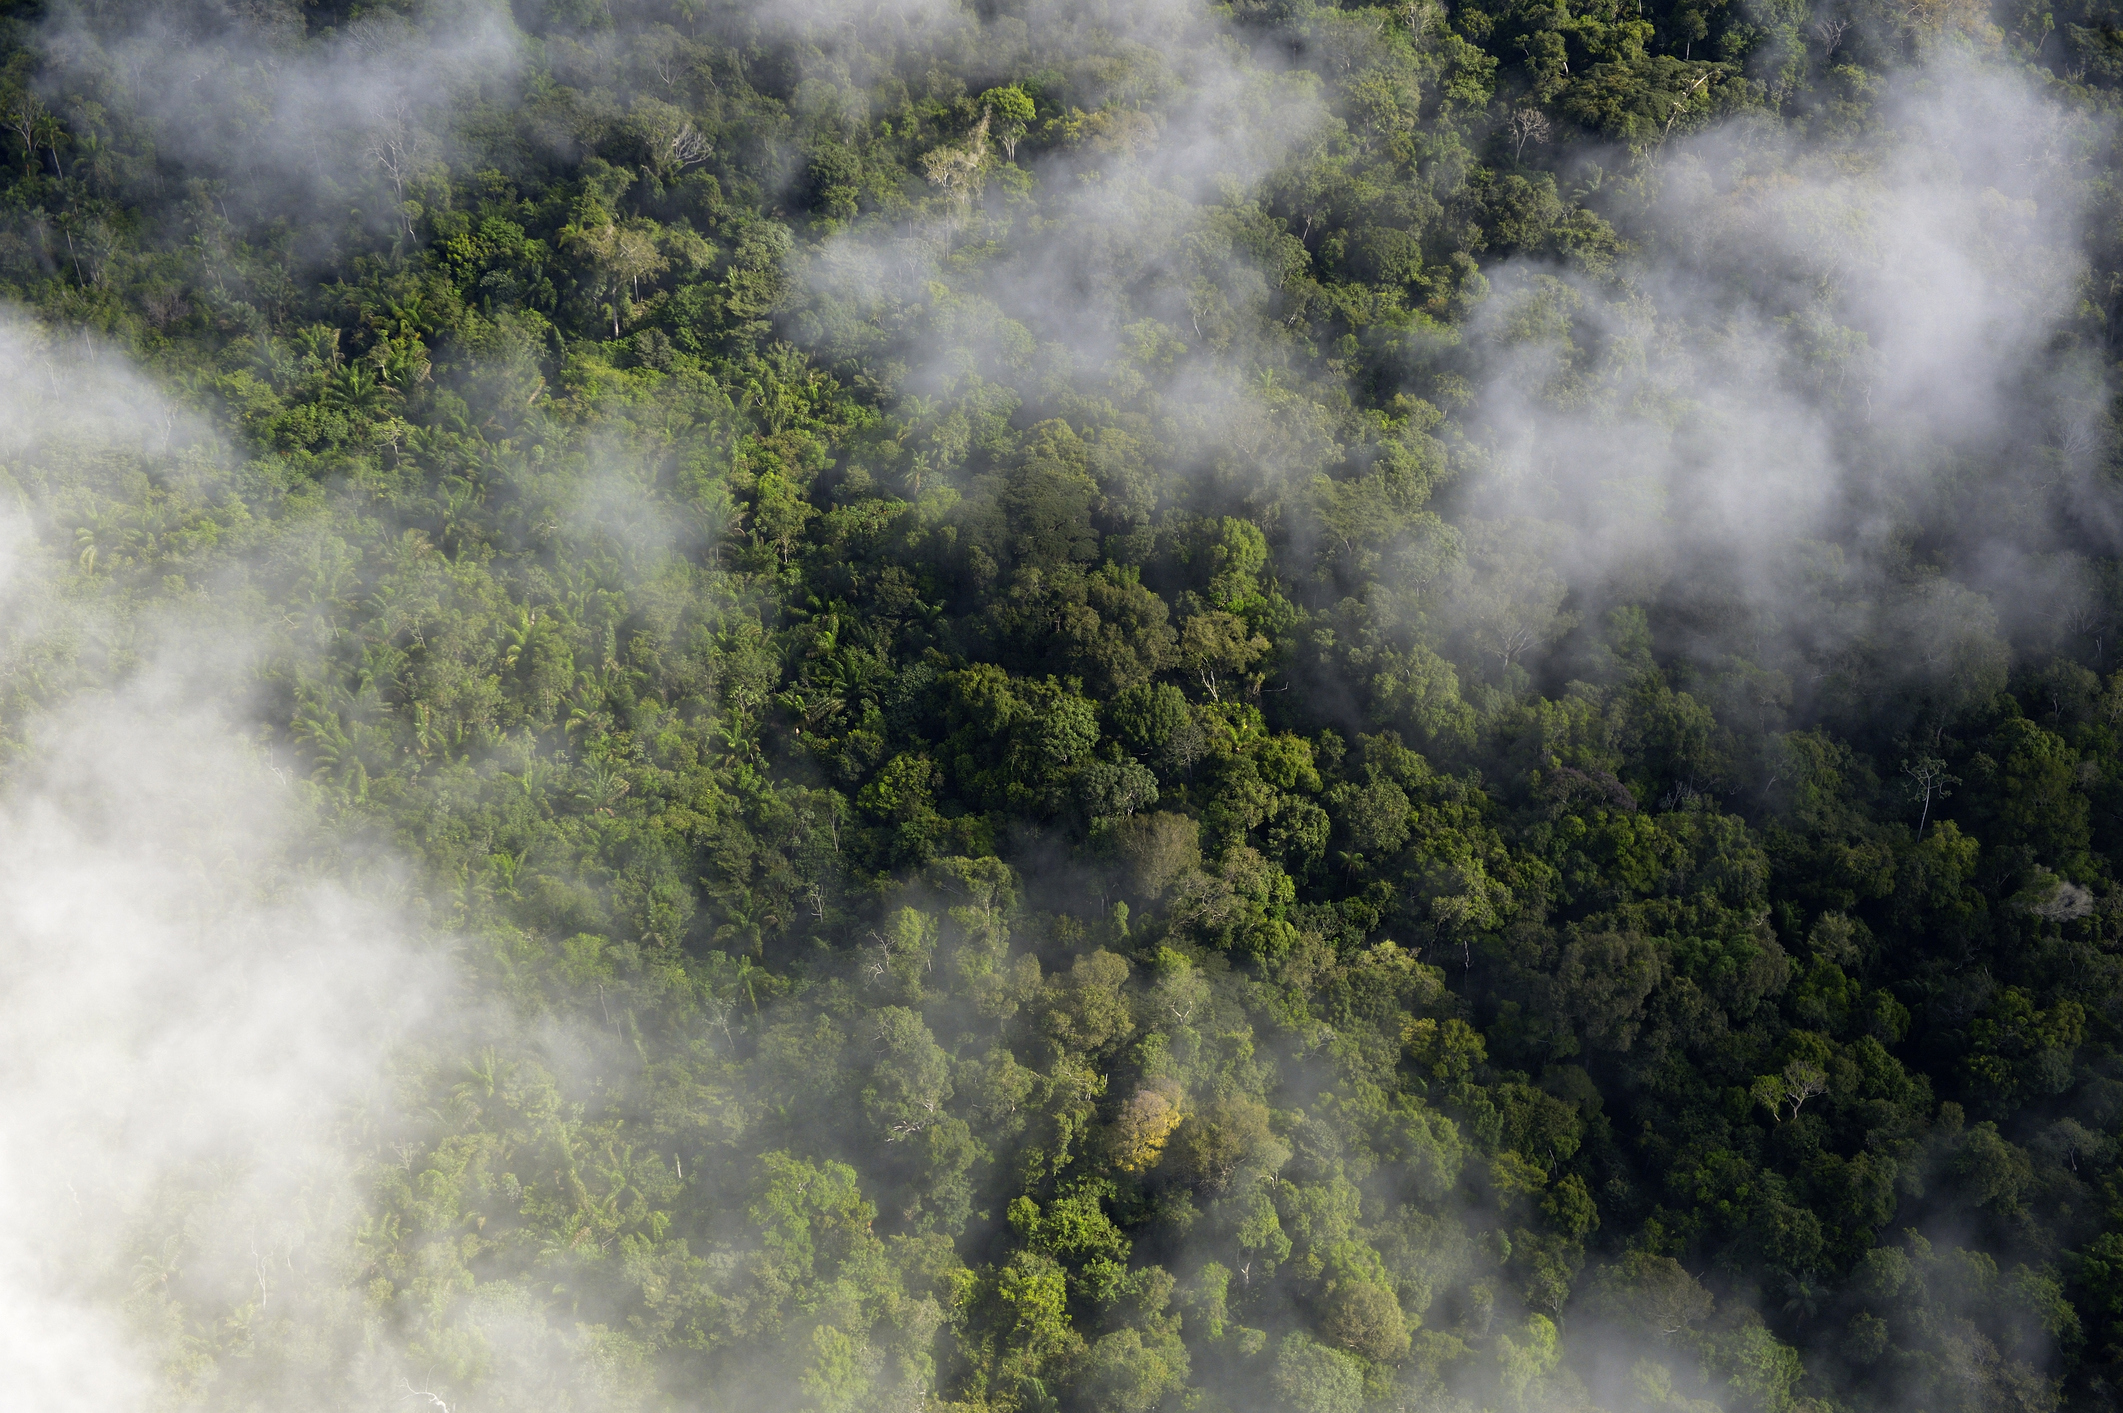 The Amazon Forest. Credit: Westend61/Getty Images